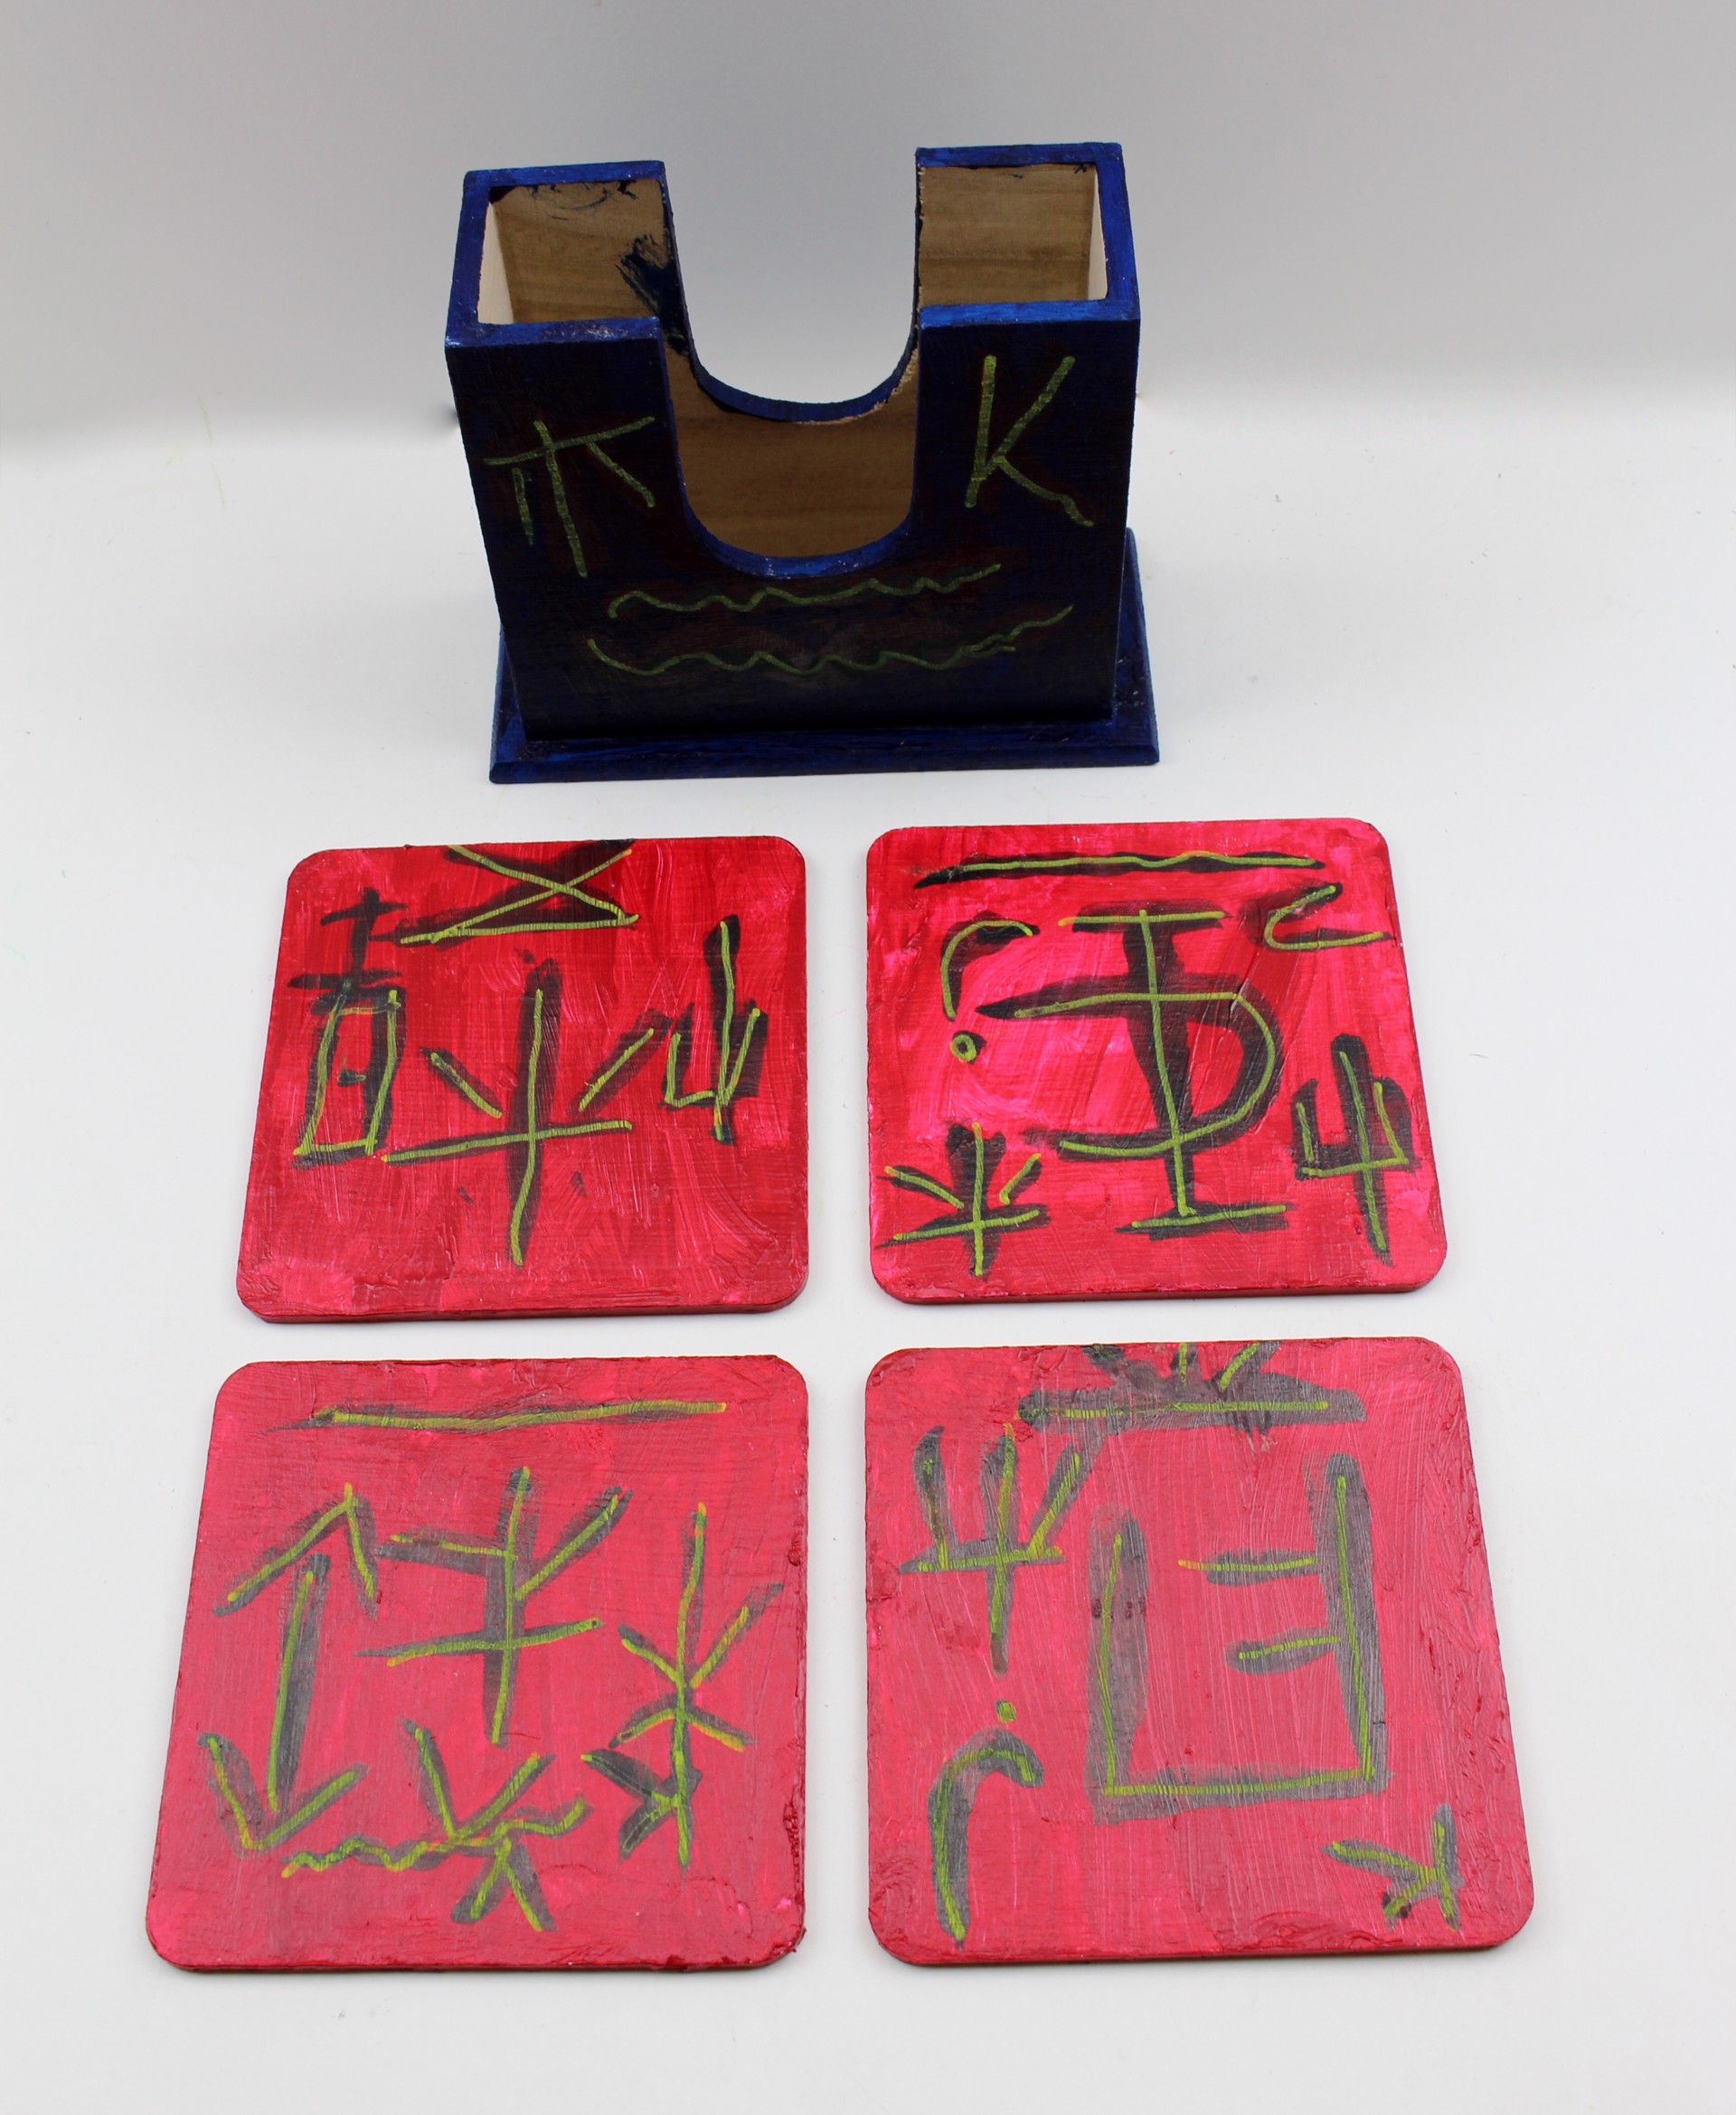 Blue and Red (coaster set) by Robert Corcoran